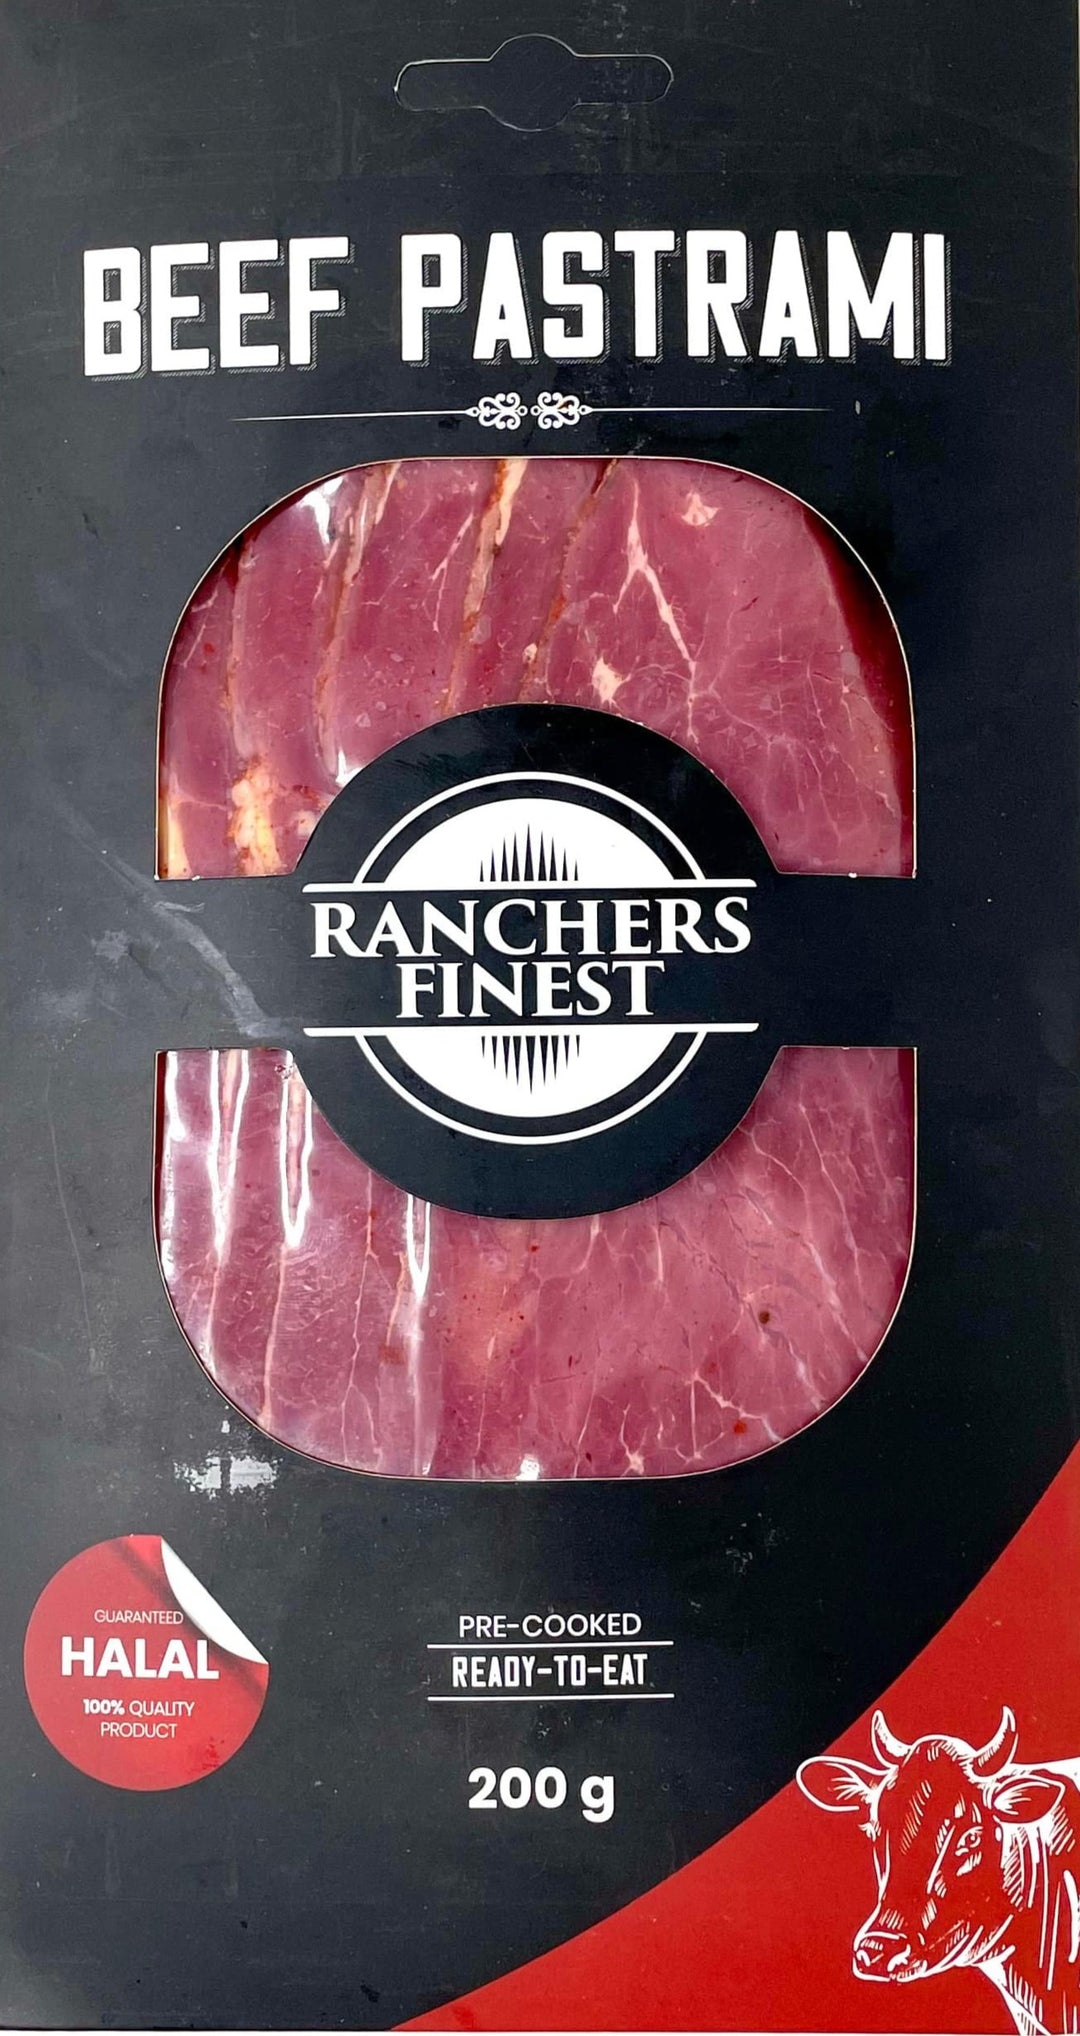 Ranchers Finest Beef Pastrami 200g